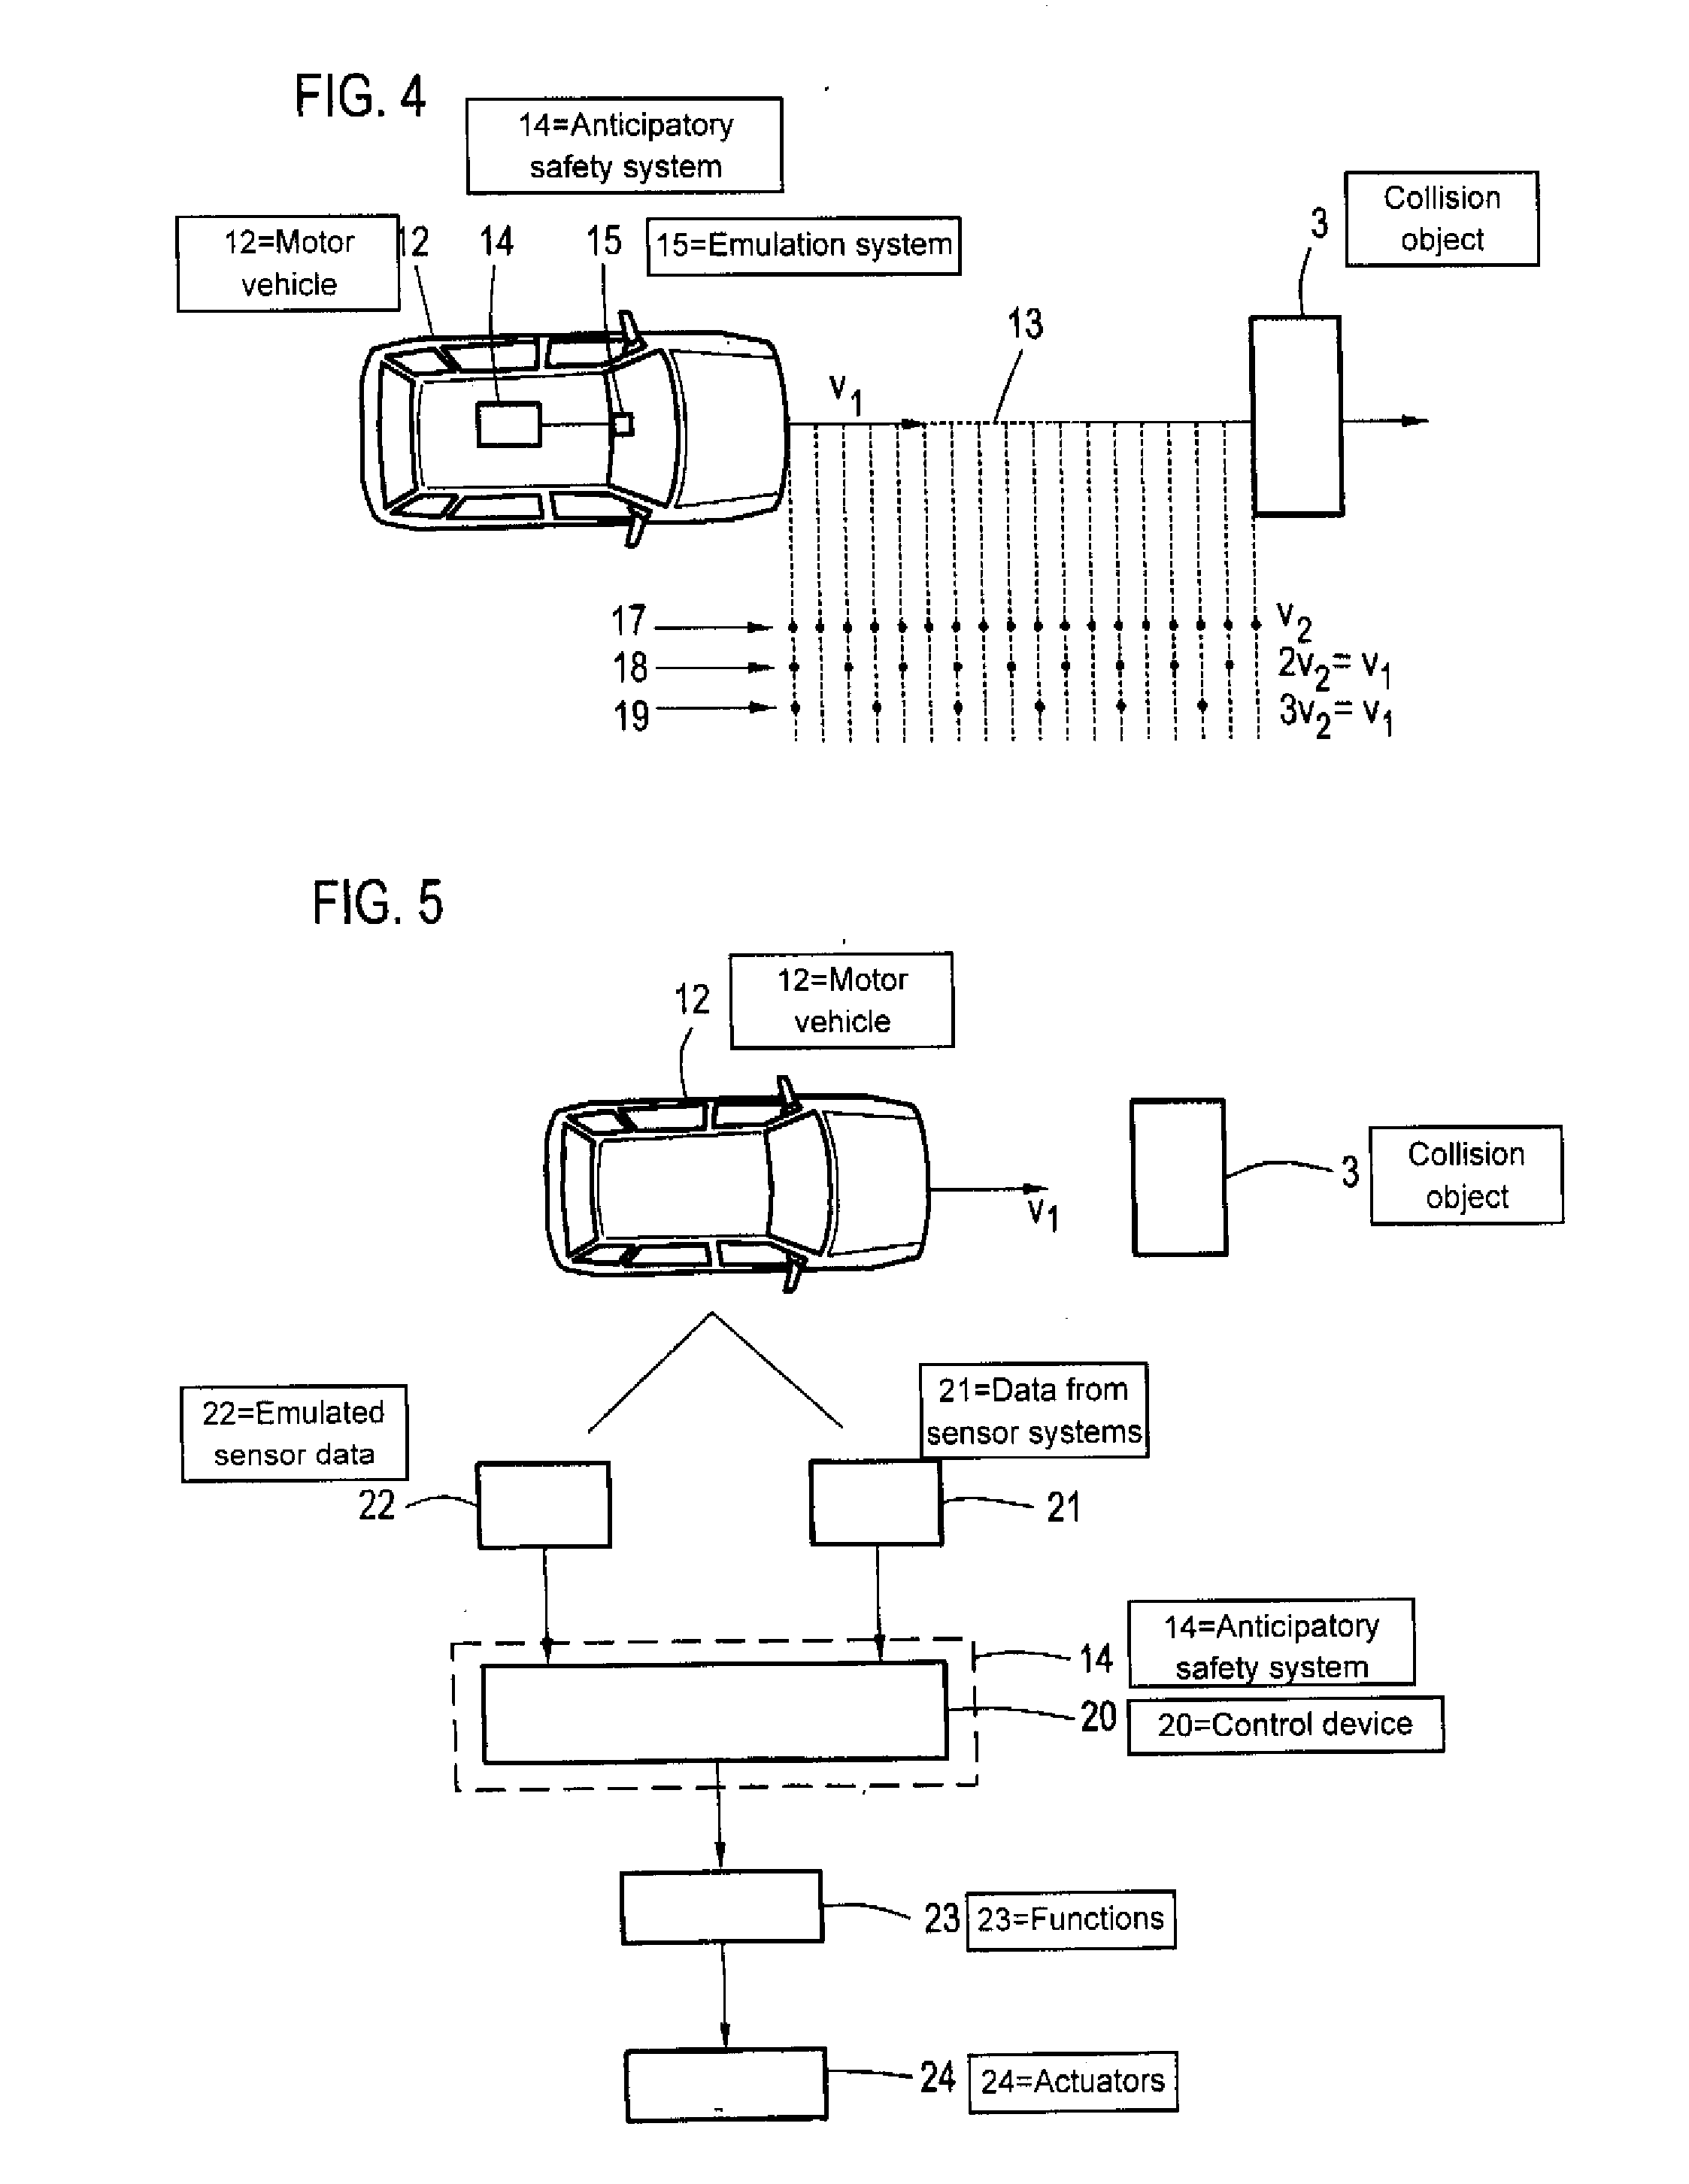 Method for emulating an environmental sensor in a motor vehicle and for testing an anticipatory safety system, and an emulation system